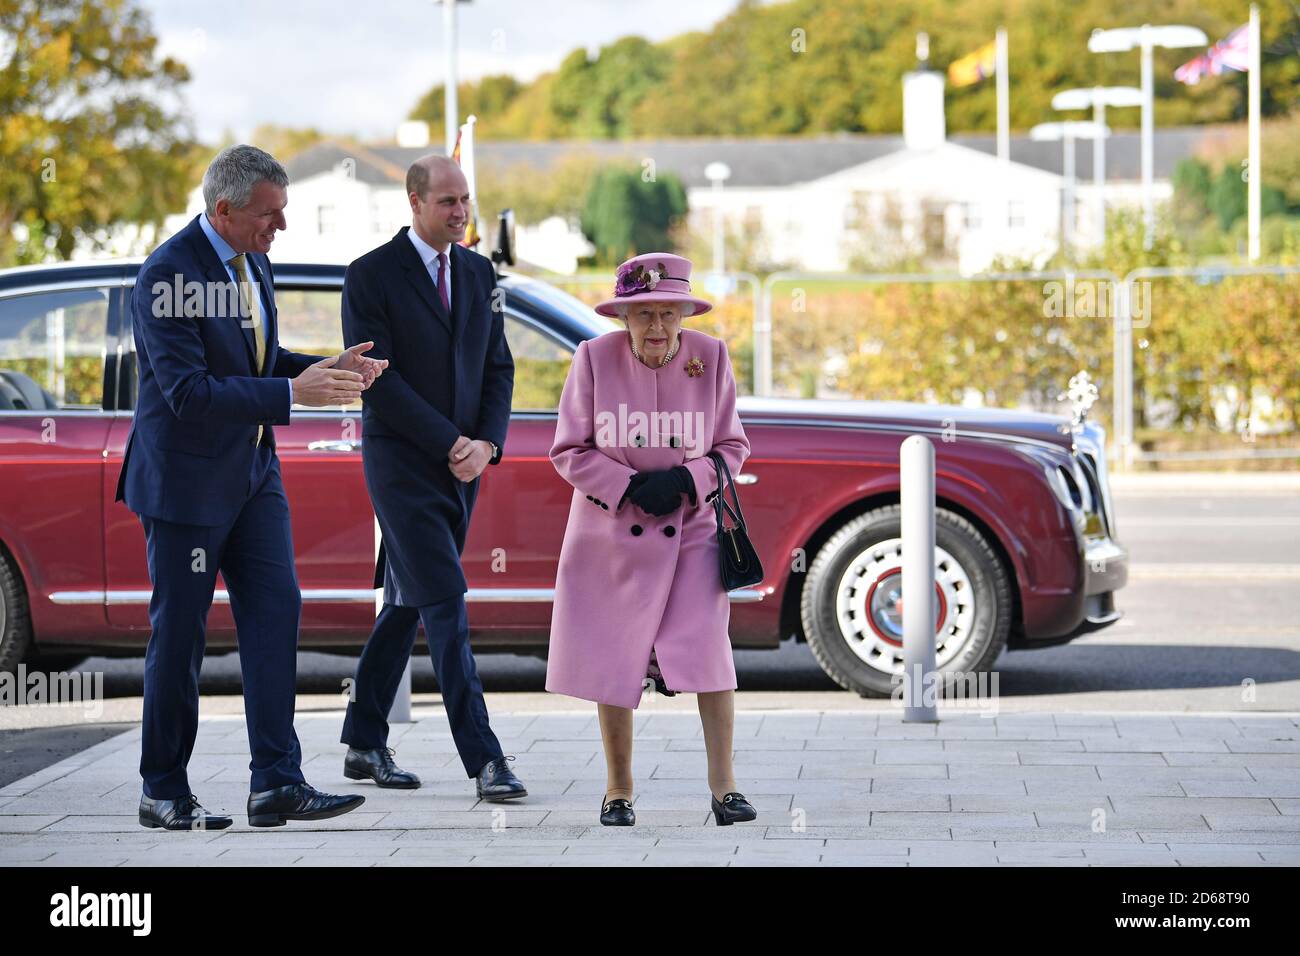 Queen Elizabeth II and the Duke of Cambridge (centre) speak with Chief Executive Gary Aitkenhead (L) as they head back to the Energetics Analysis Centre during their visit to the Defence Science and Technology Laboratory (DSTL) at Porton Down, Wiltshire. Stock Photo